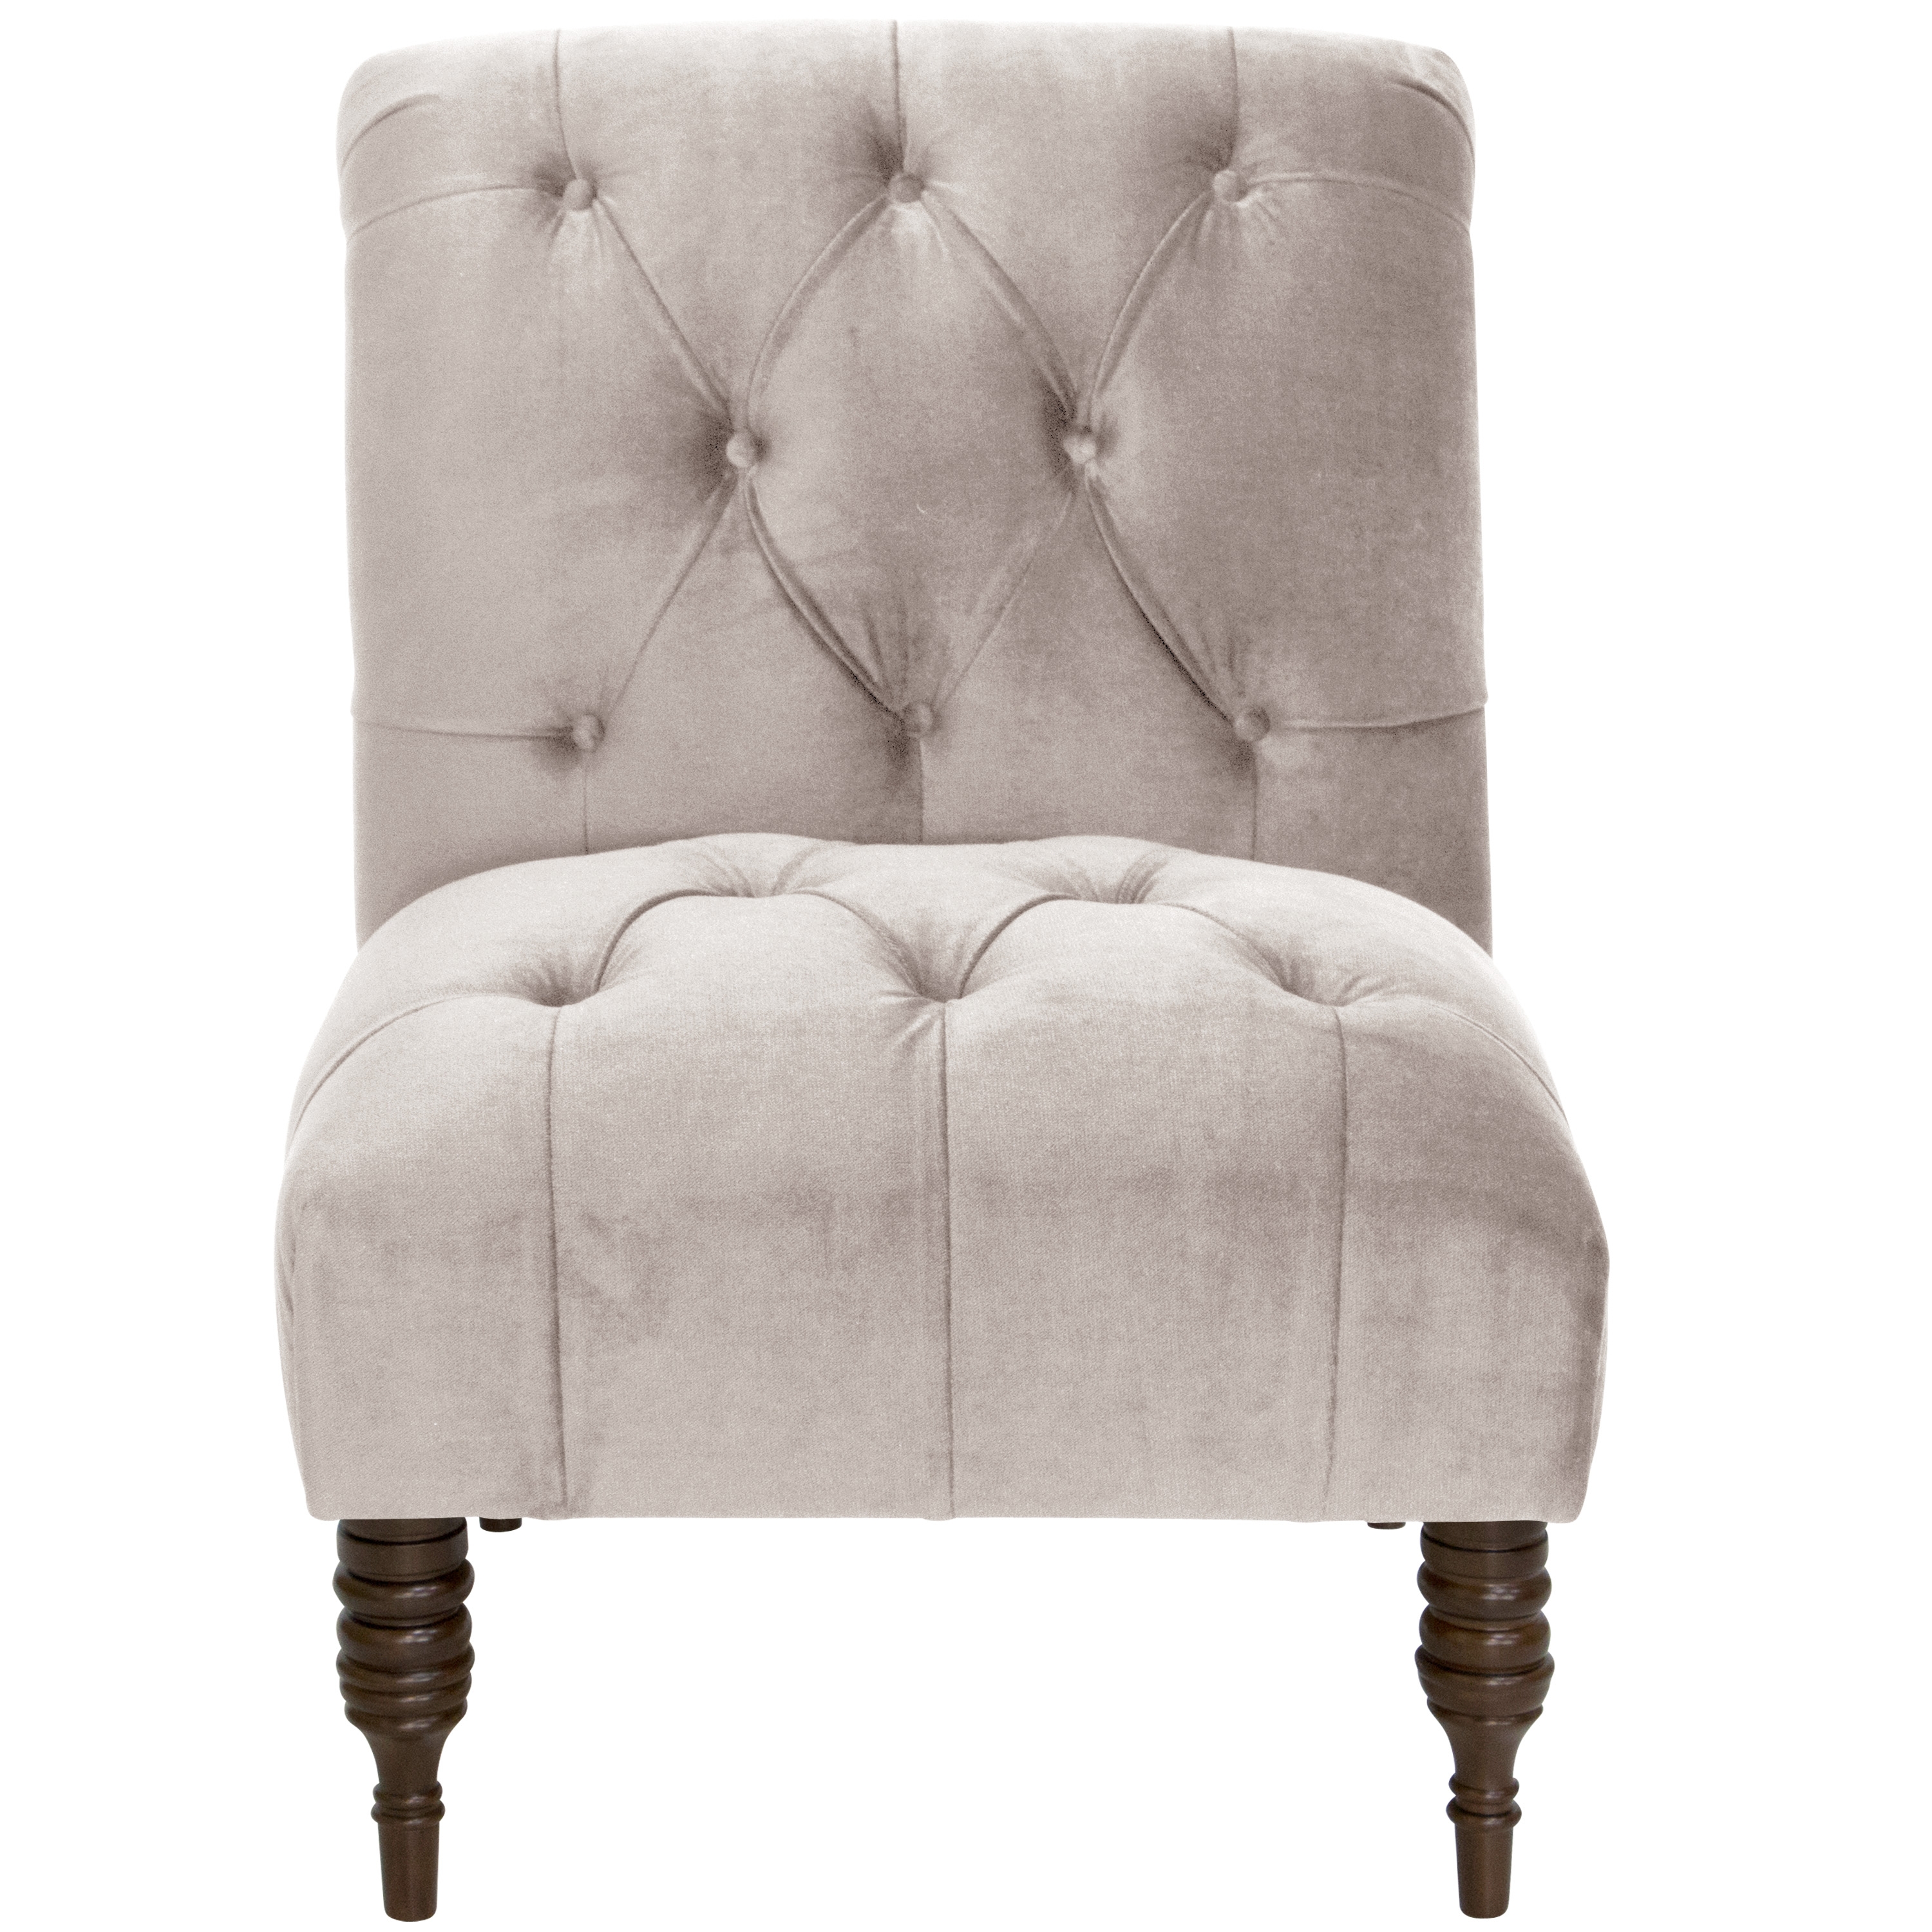 Hyde Park Chair in Mystere Dove - Image 1